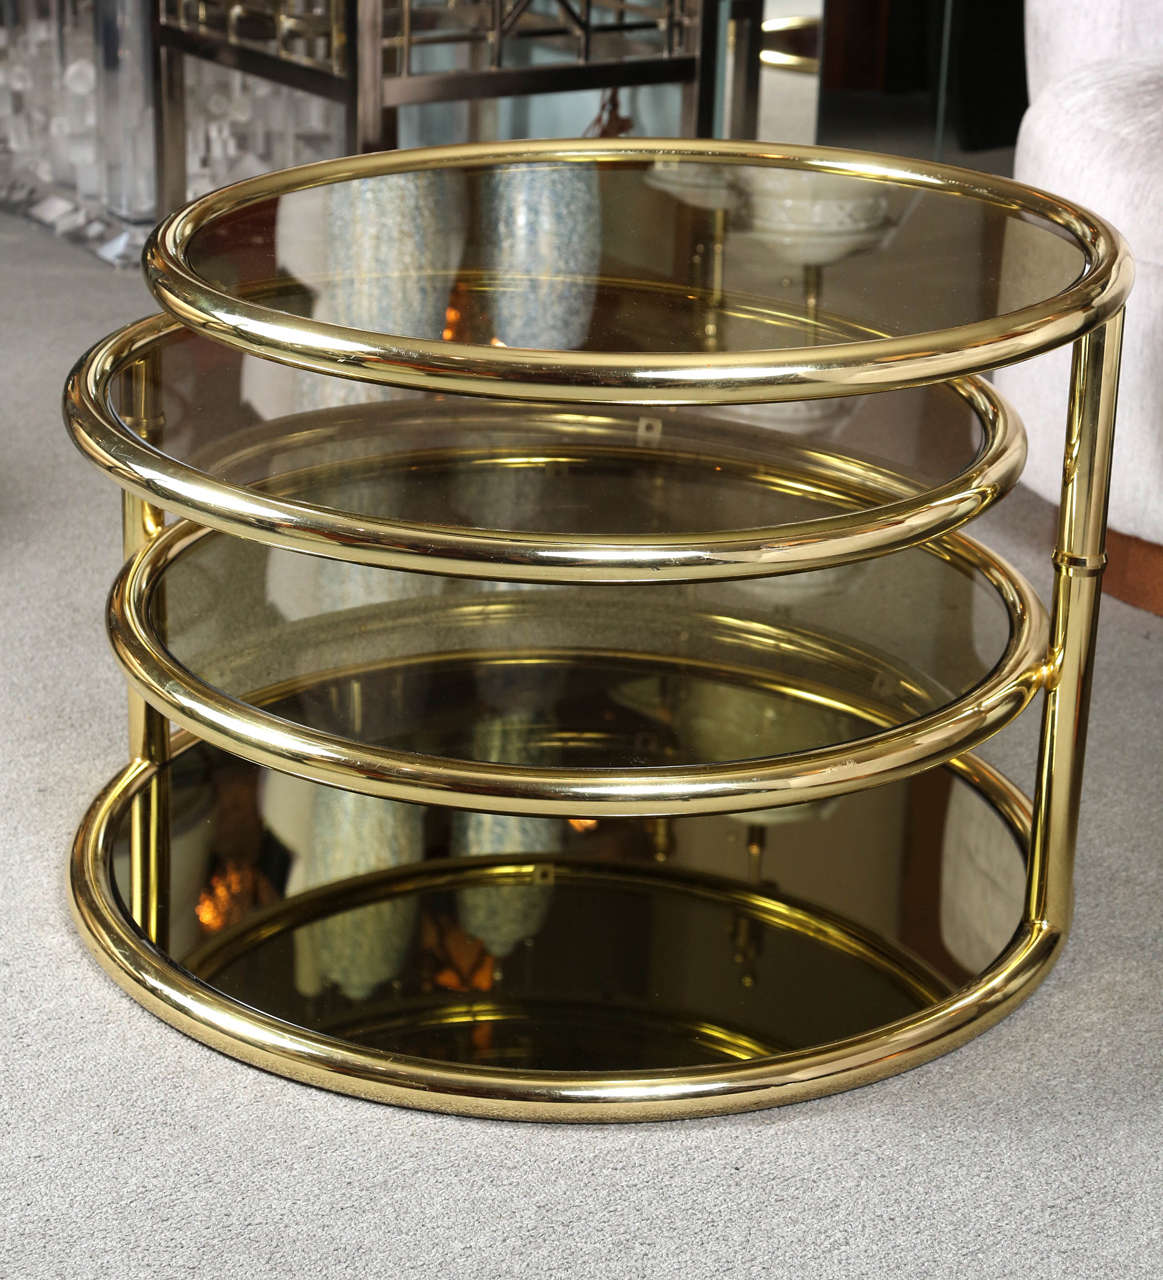 Elegant cocktail table with four different levels in a polished brass finish and
smoked glass.